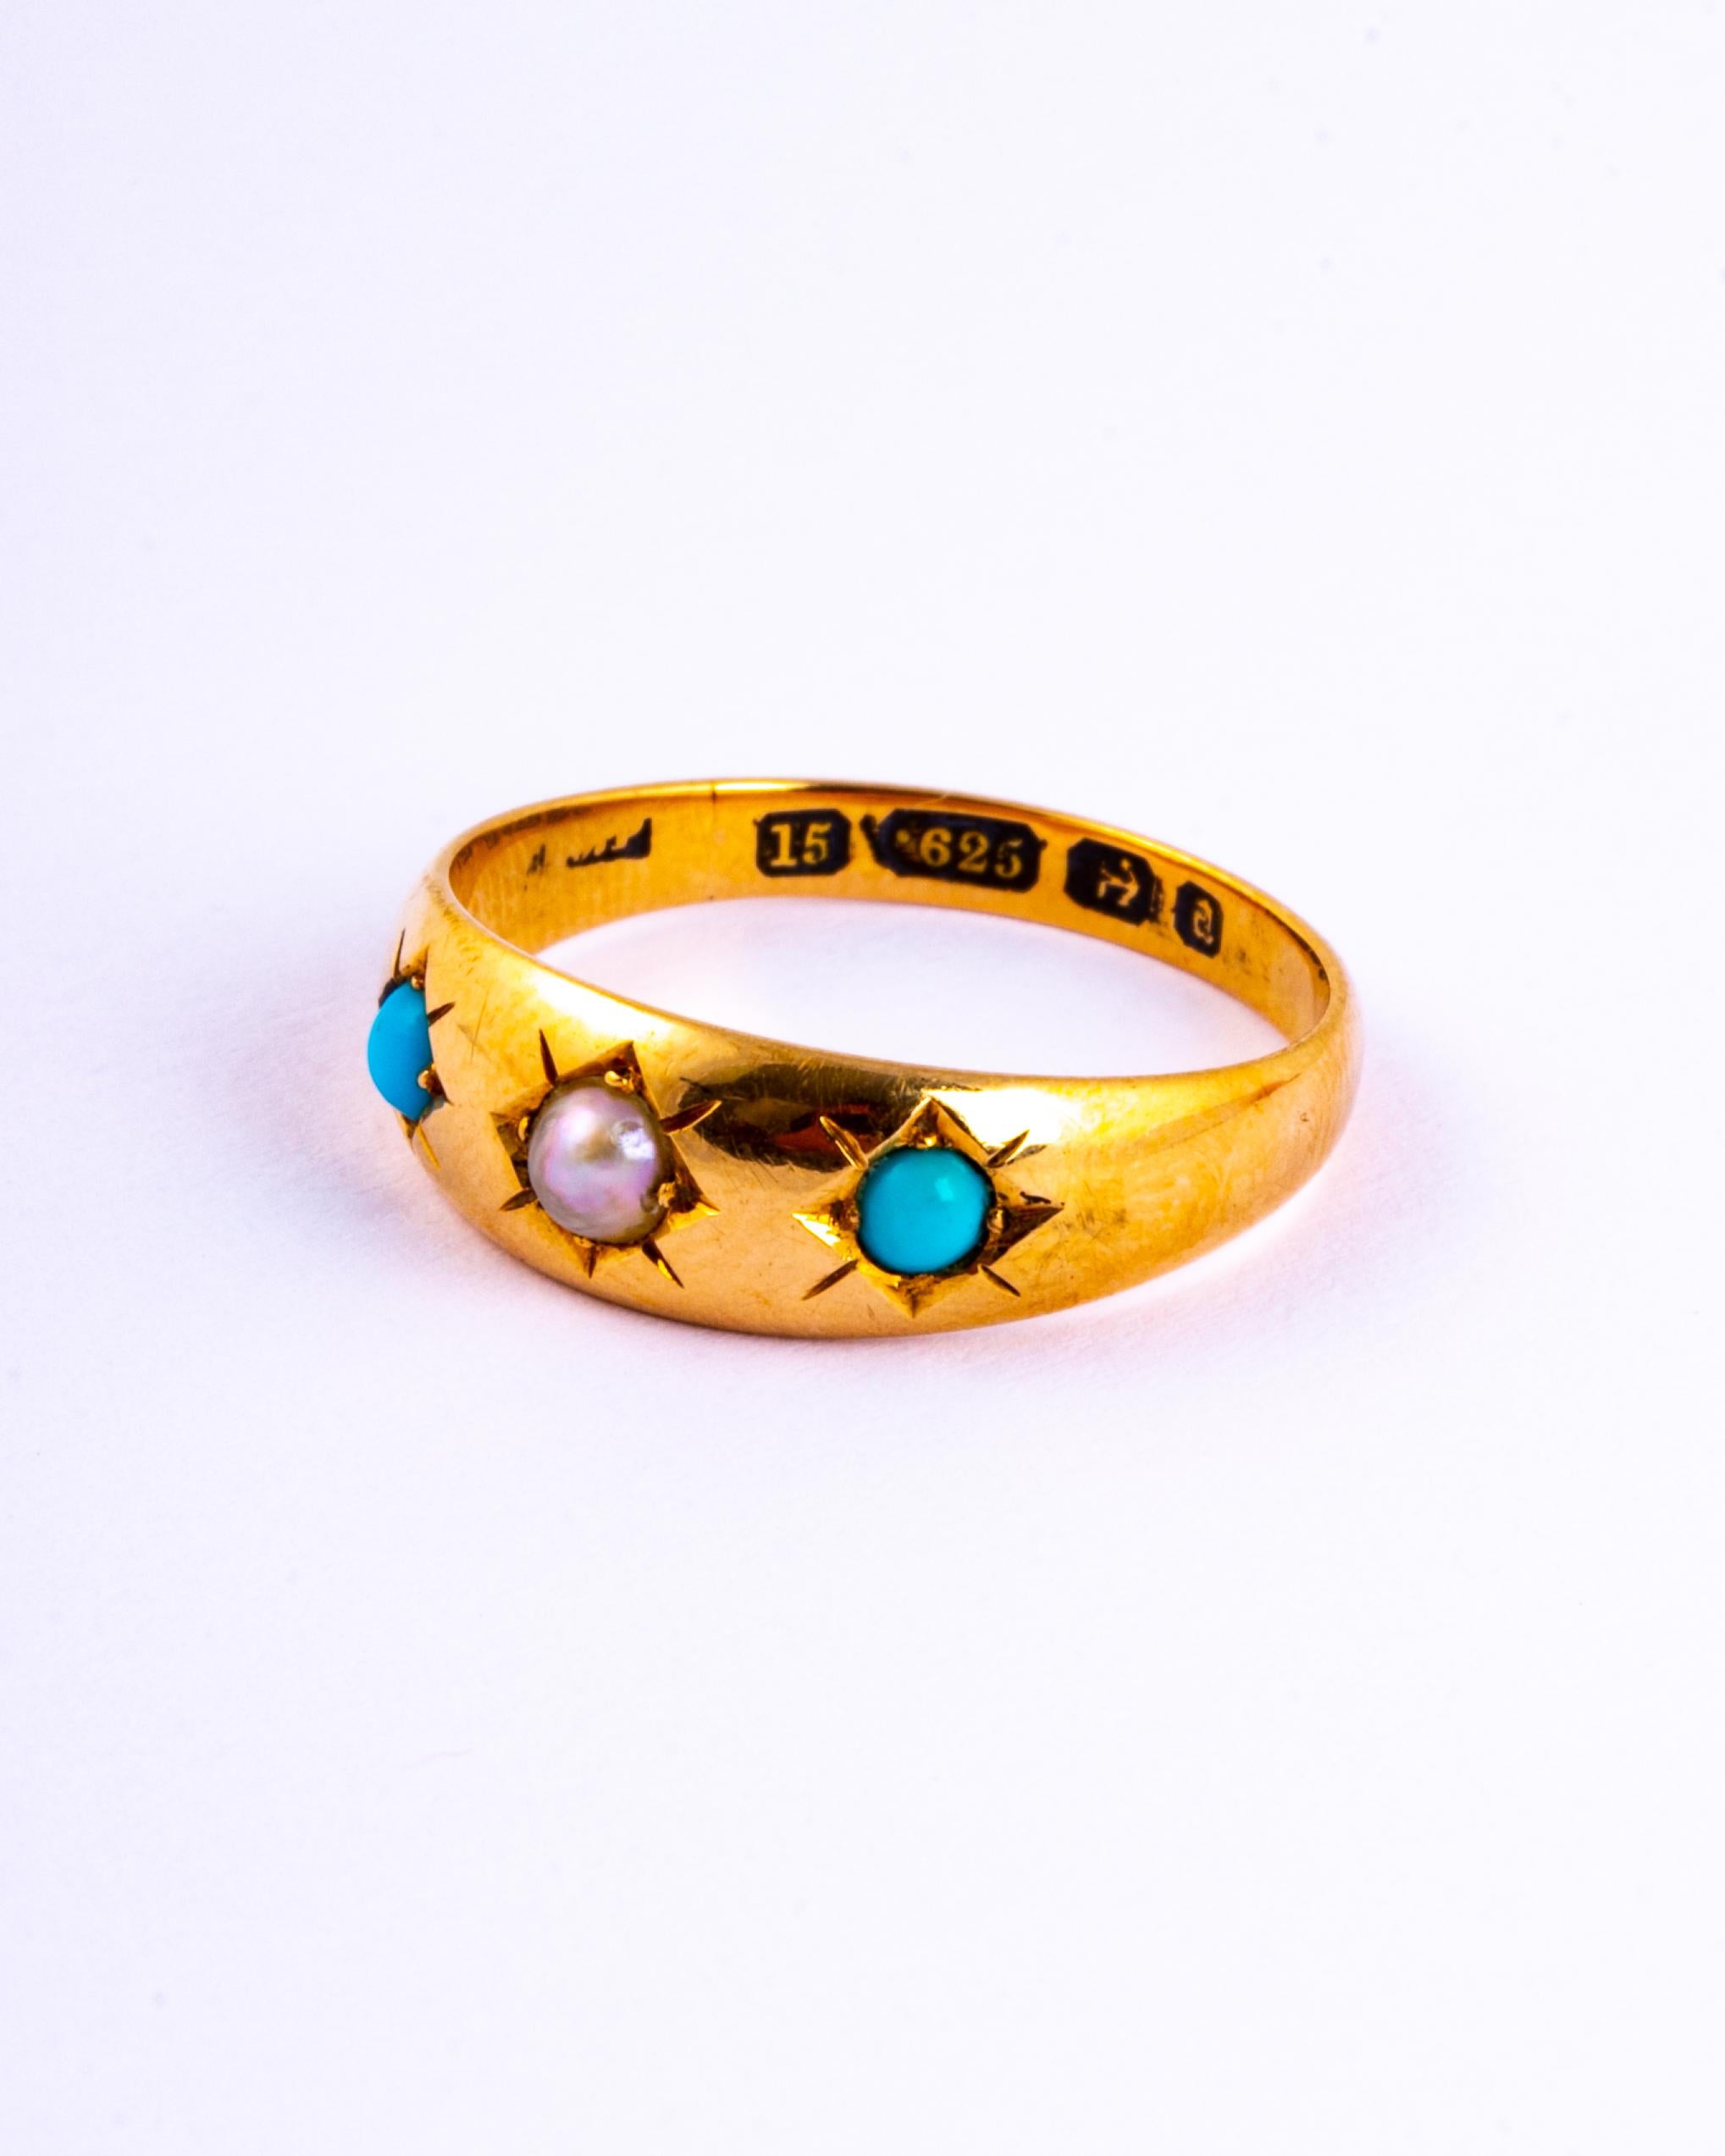 The three stones are set in star settings and are a deep turquoise colour and shimmering white. The ring is modelled in 15ct gold and is made in Birmingham, England.

Ring Size: P or 7 3/4
Band Width: 7mm 

Weight: 3.5g 